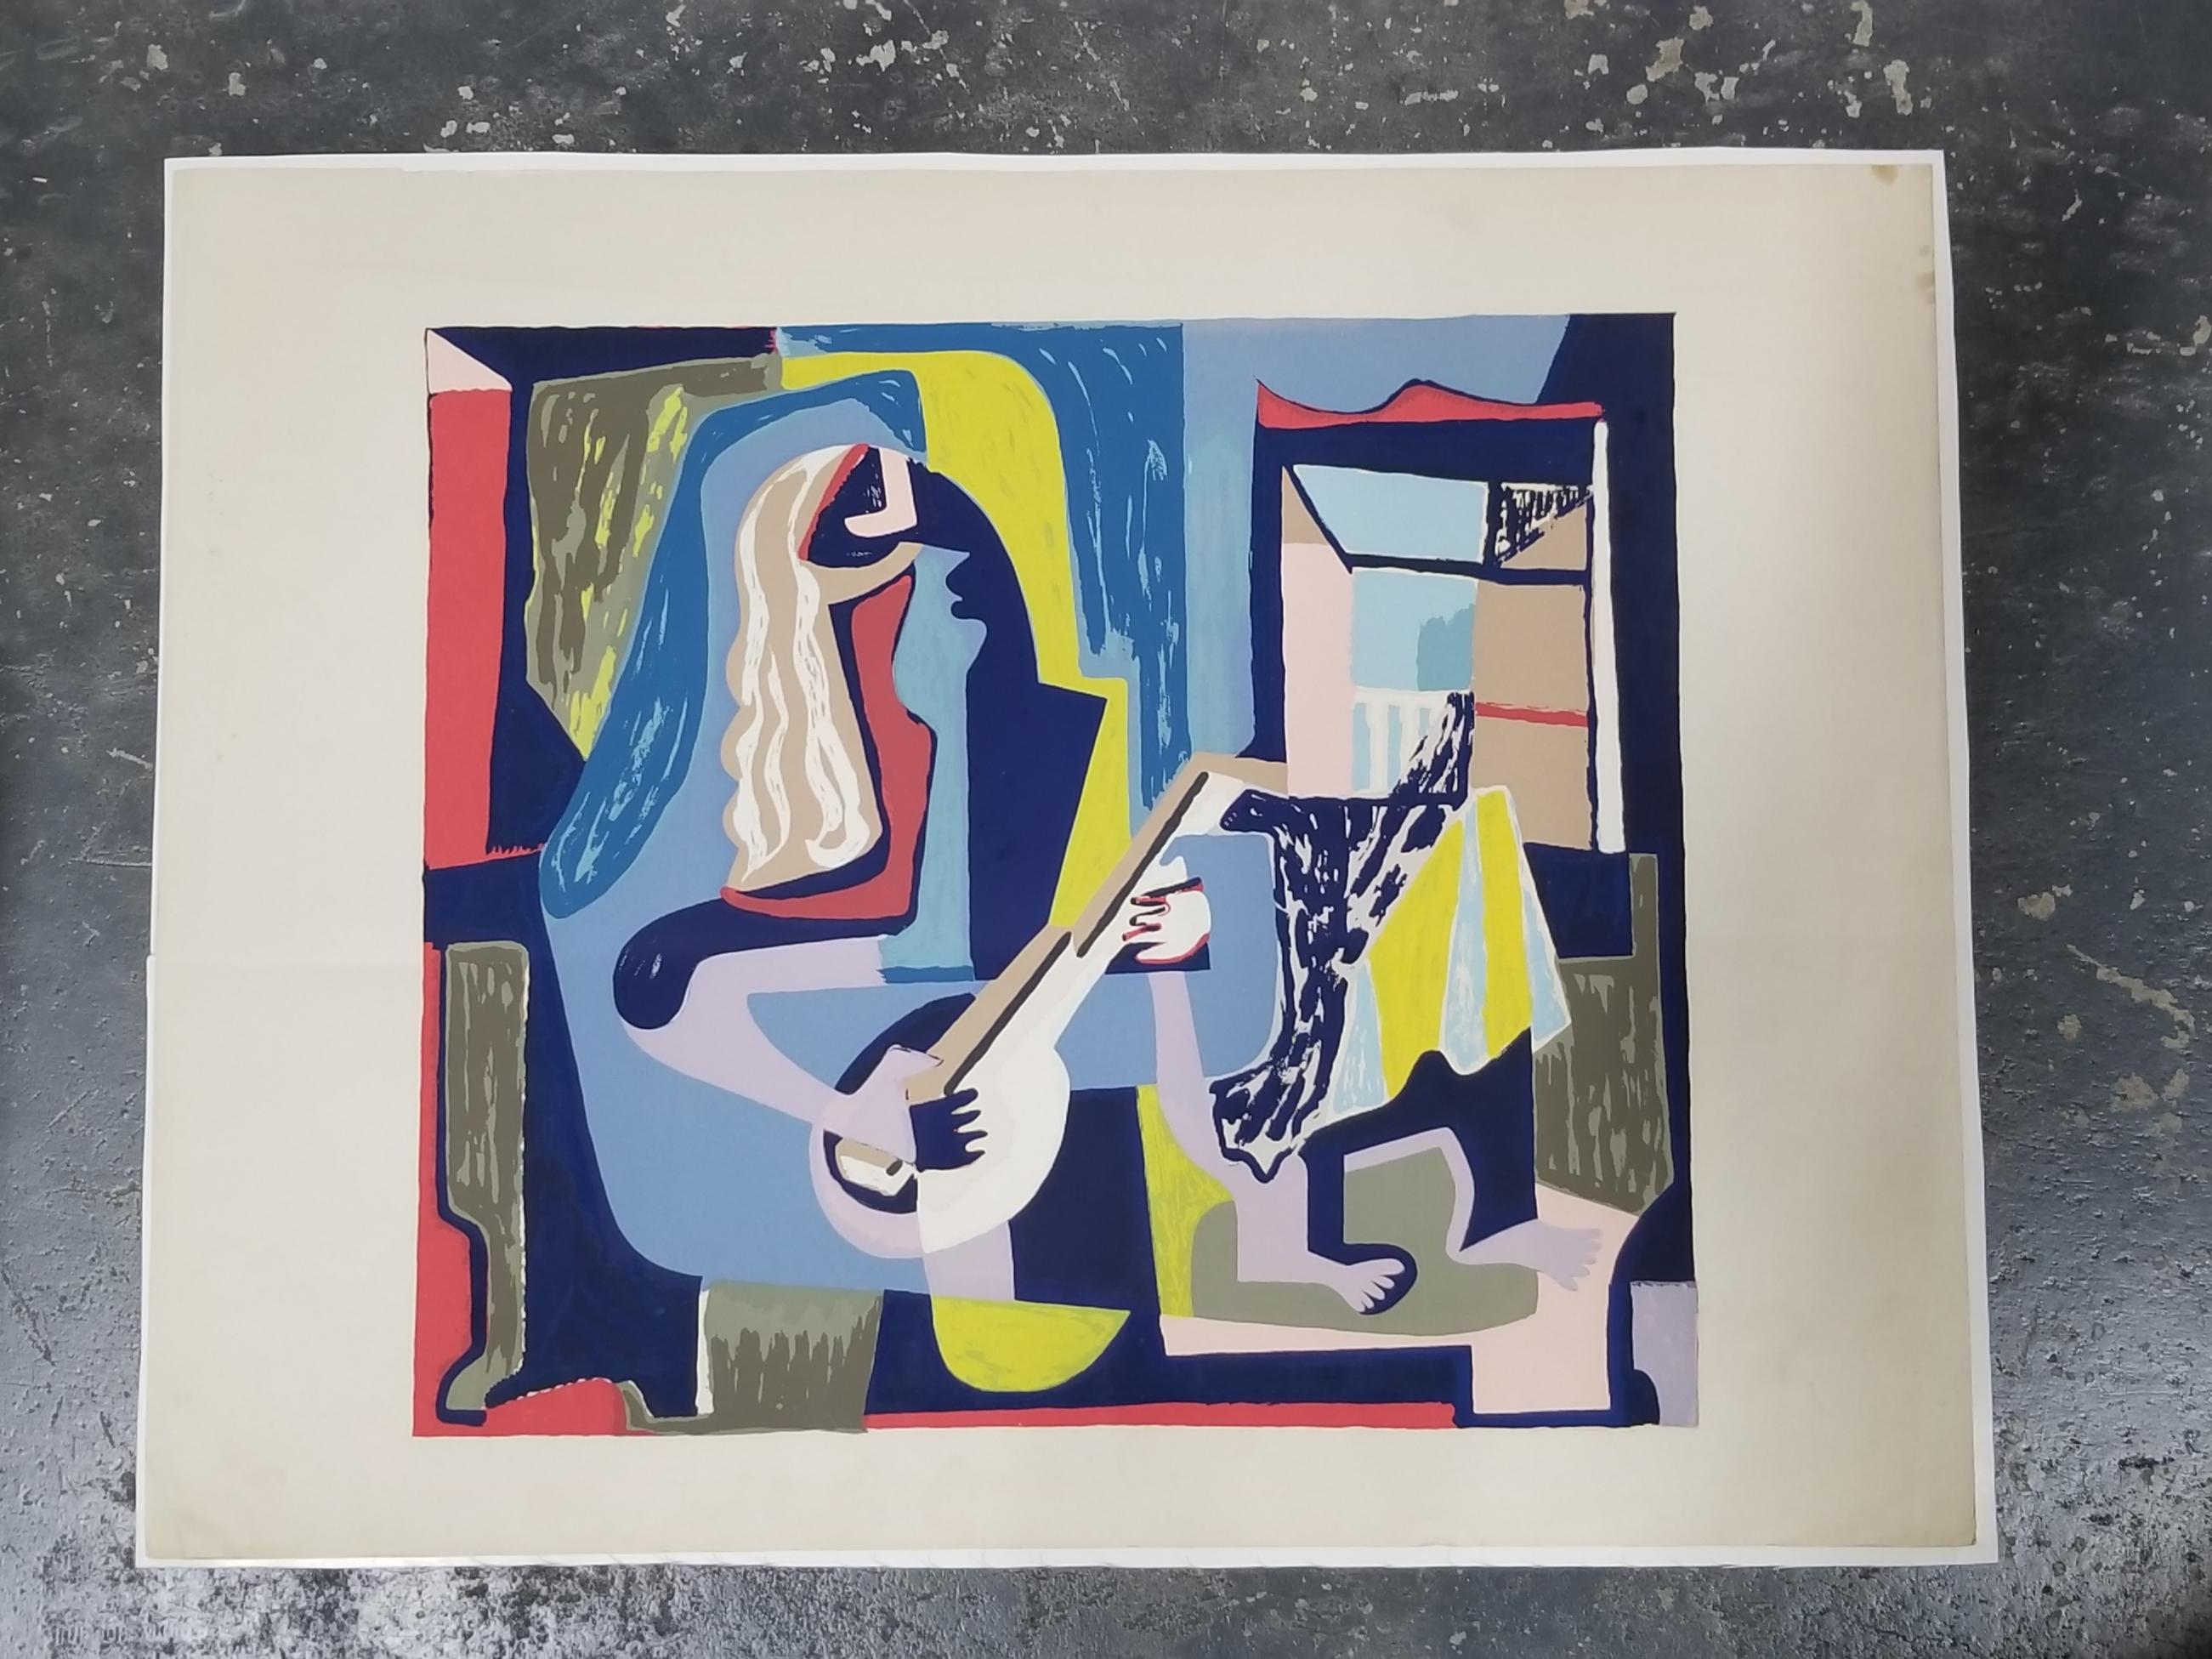 Abstract woodblock by California Artist Herman Roderick Volz. Figure with stringed musical instrument. Unframed. Acquired directly from the estate of Volz, unsigned, circa 1940s. Image measures 17.25